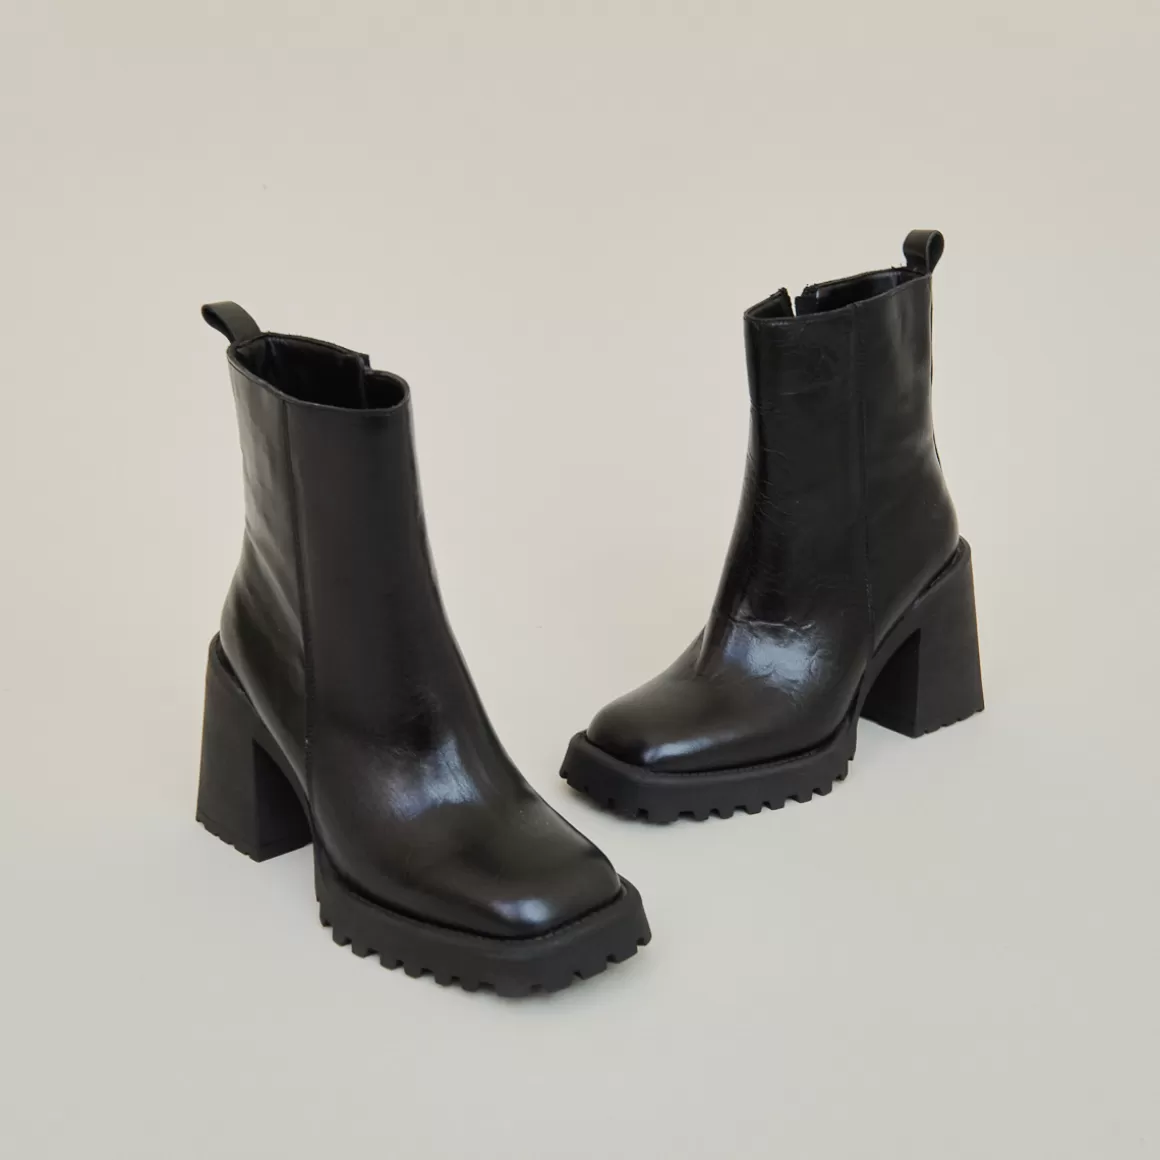 High boots with notched soles and square toes<Jonak Best Sale